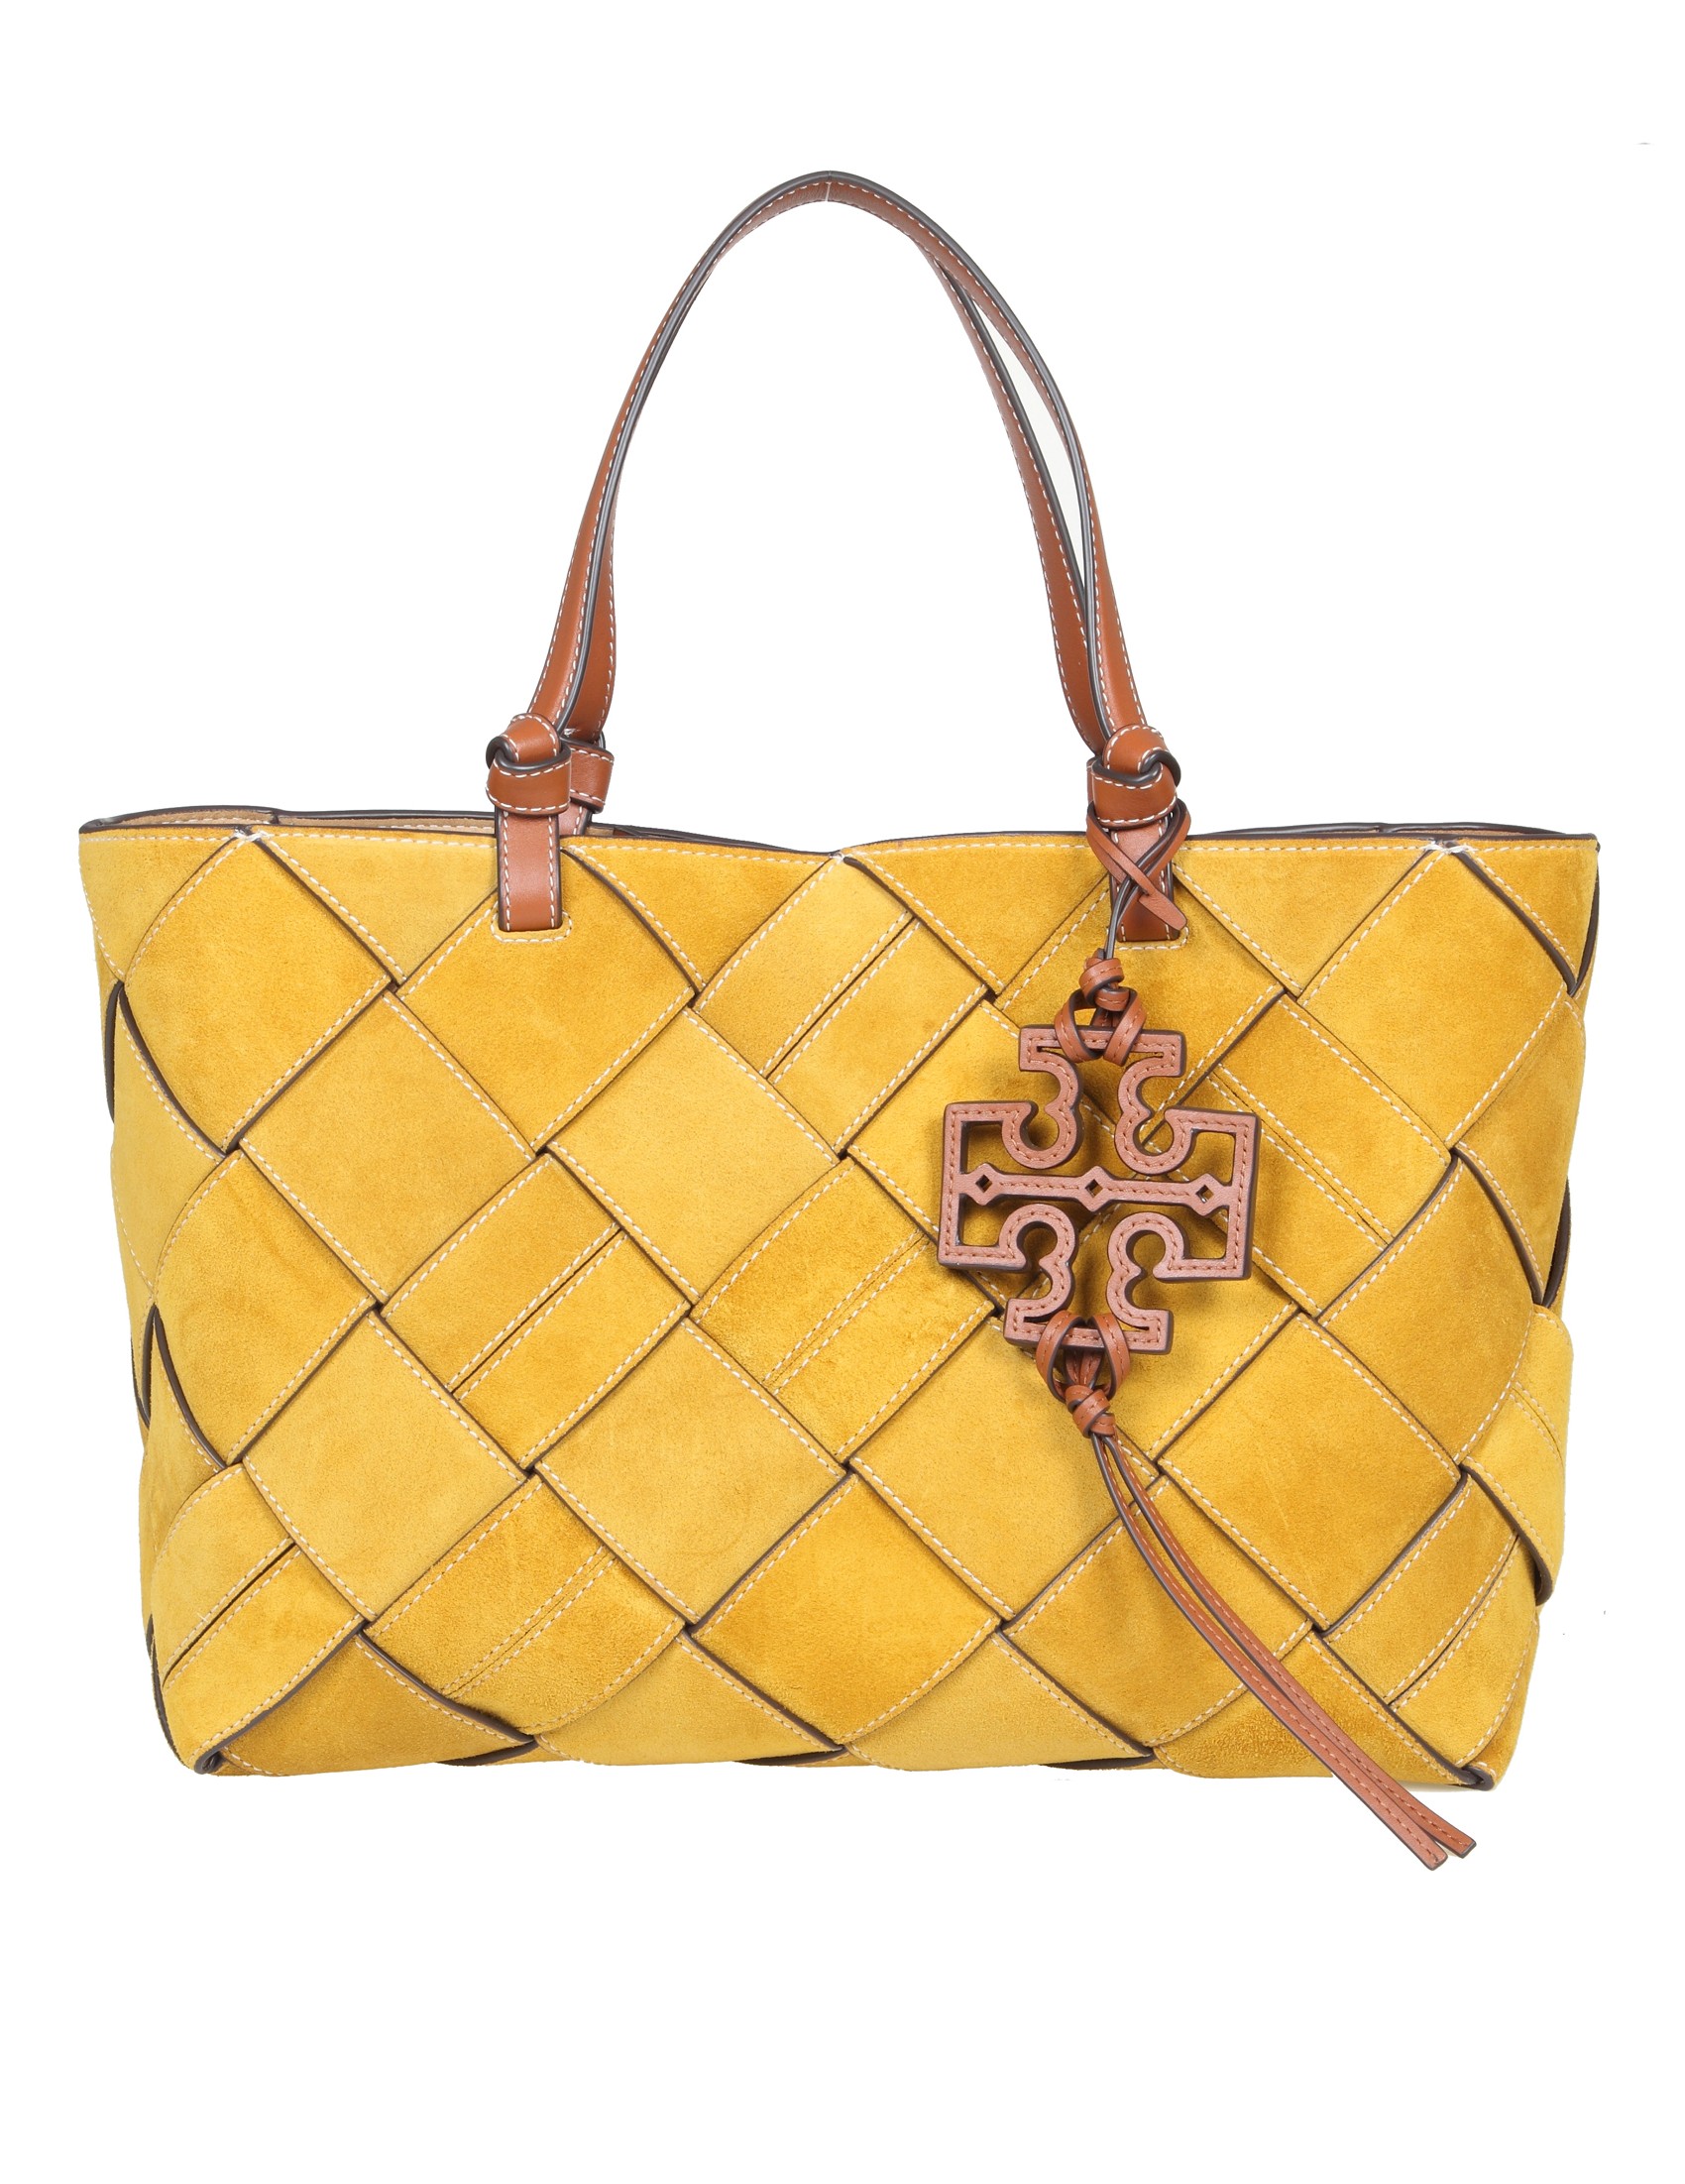 TORY BURCH SHOPPING MILLER IN SUEDE COLOR OAK